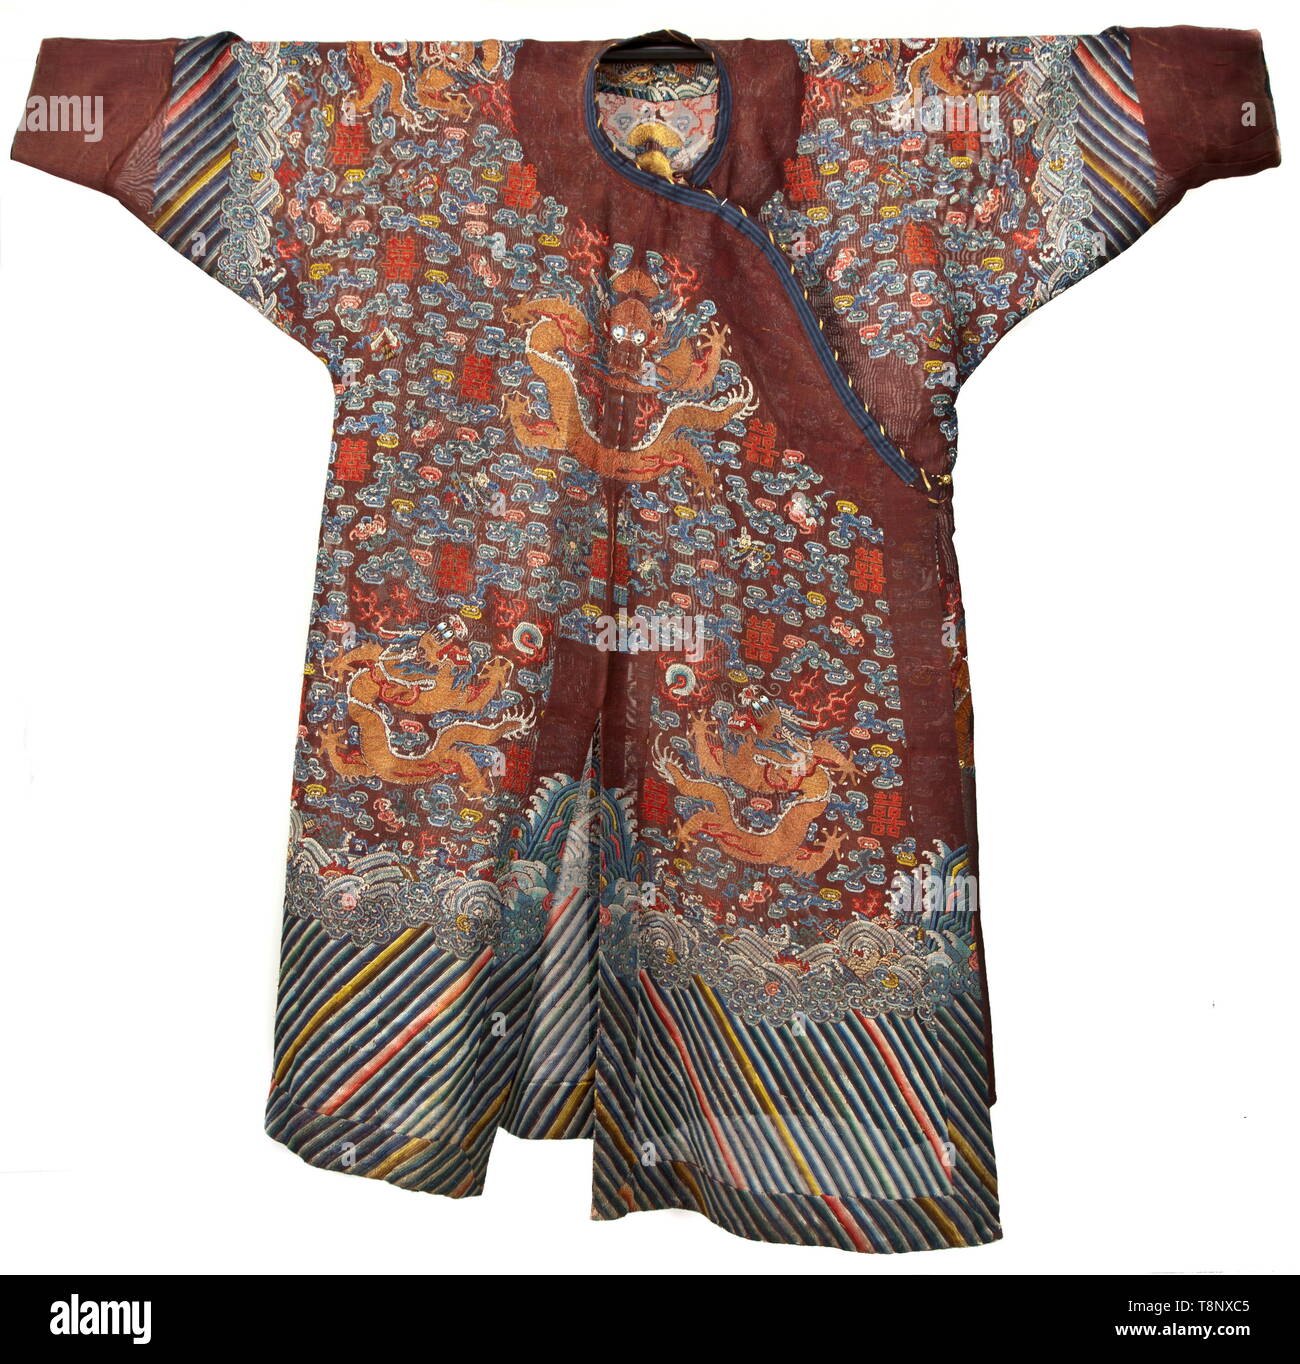 A Longpao or dragon robe of a Chinese mandarin Fine, dark-red cotton fabric. Profusely embroidered and decorated with polychrome images from the Chinese culture. Among them dragons, Chinese characters (wedding symbol 'Xi'), five openwork round buttons with floral embellishments. Length of coat circa 140 cm. Extremely finely worked piece (gold and silk embroideries) from the time around 1910. According to the consignor, in 1919, Felix Count of Luckner (the 'Sea Devil') gave the coat as a wedding gift to Calixta Agnes Princess zur Lippe-Biesterfeld, Additional-Rights-Clearance-Info-Not-Available Stock Photo